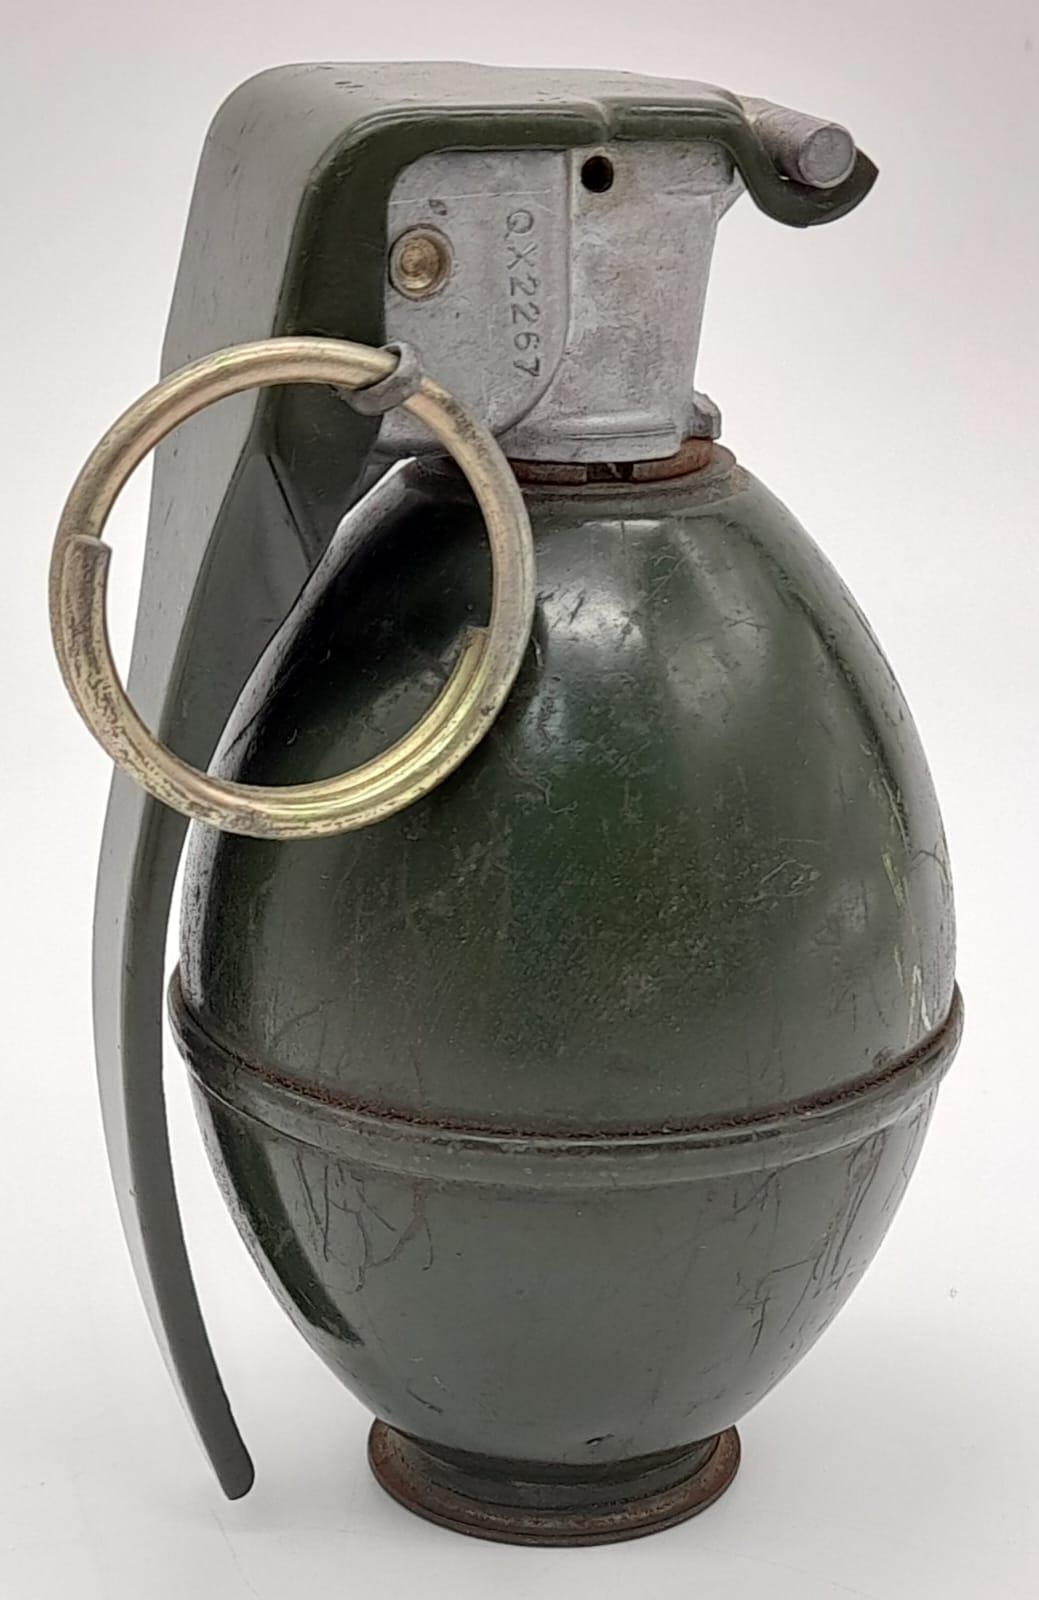 INERT Vietnam War Era US M26 hand grenade. The grenade with a smooth casing and a single rib along